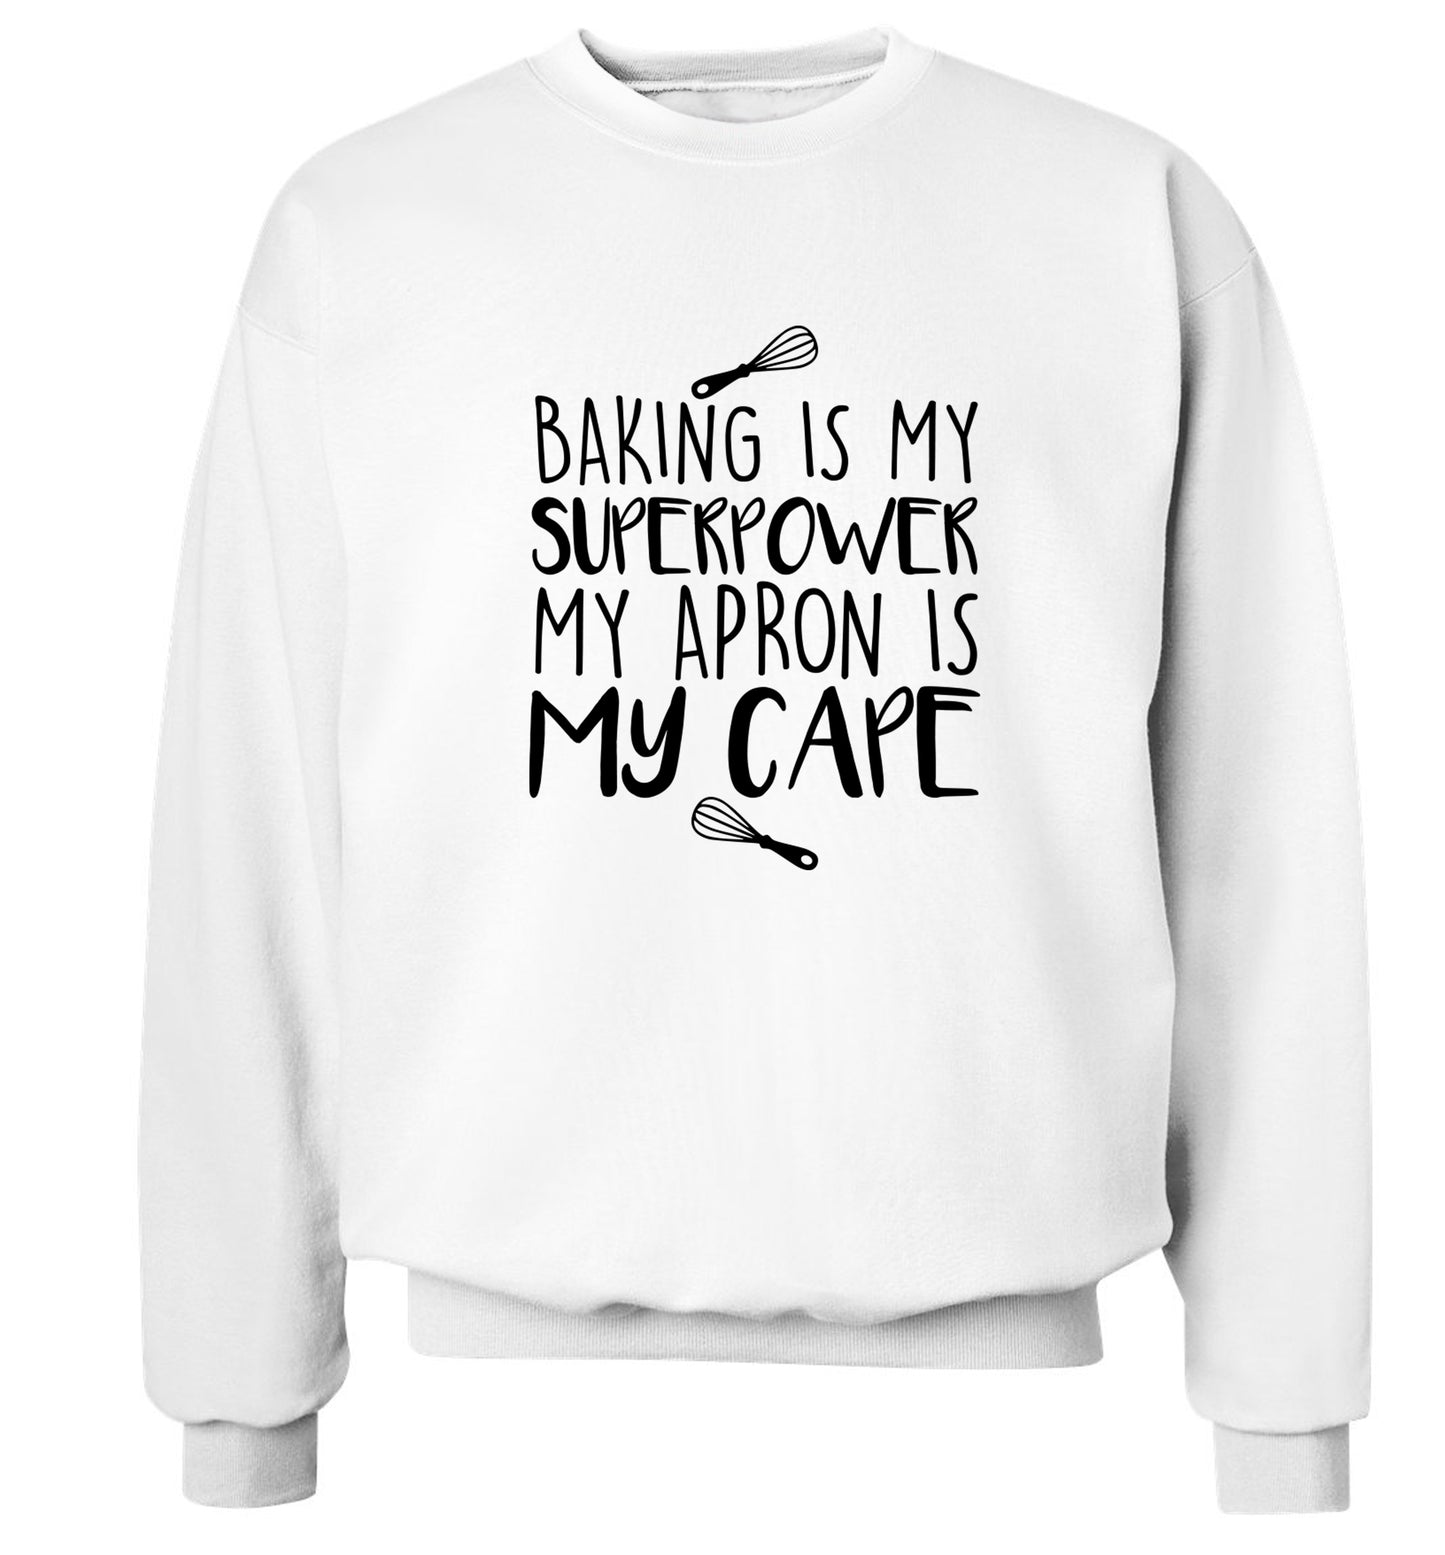 Baking is my superpower my apron is my cape Adult's unisex white Sweater 2XL